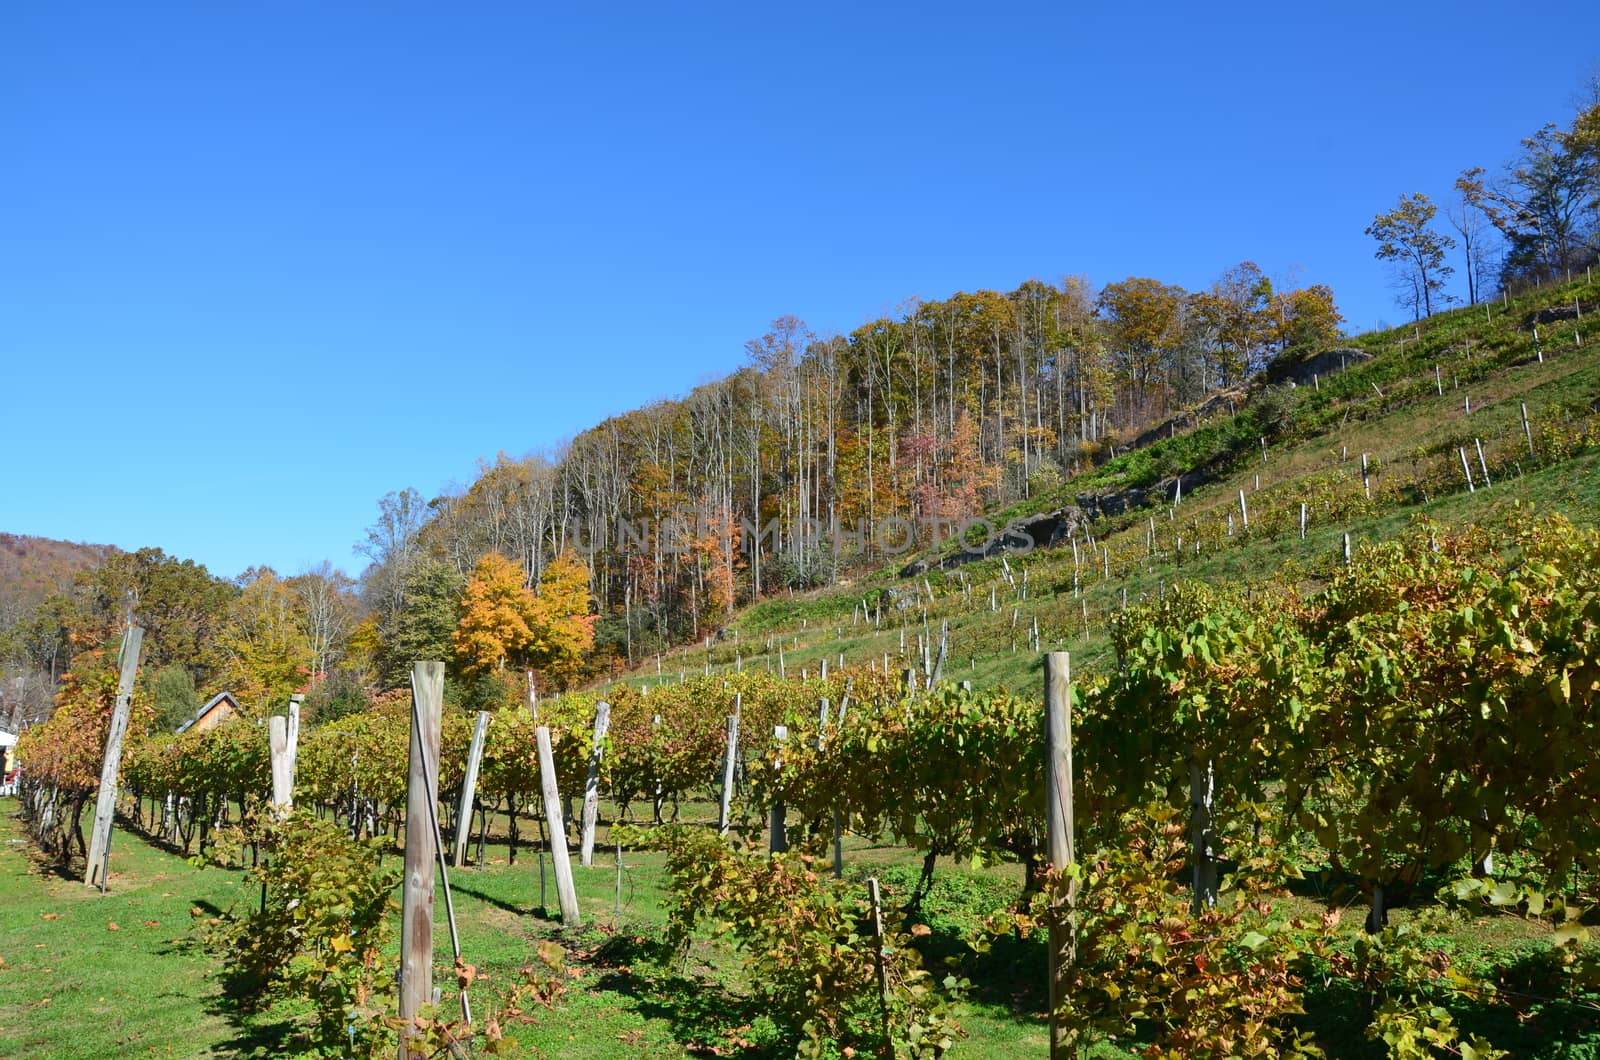 Grapes on the vine in the mountains of North Carolina